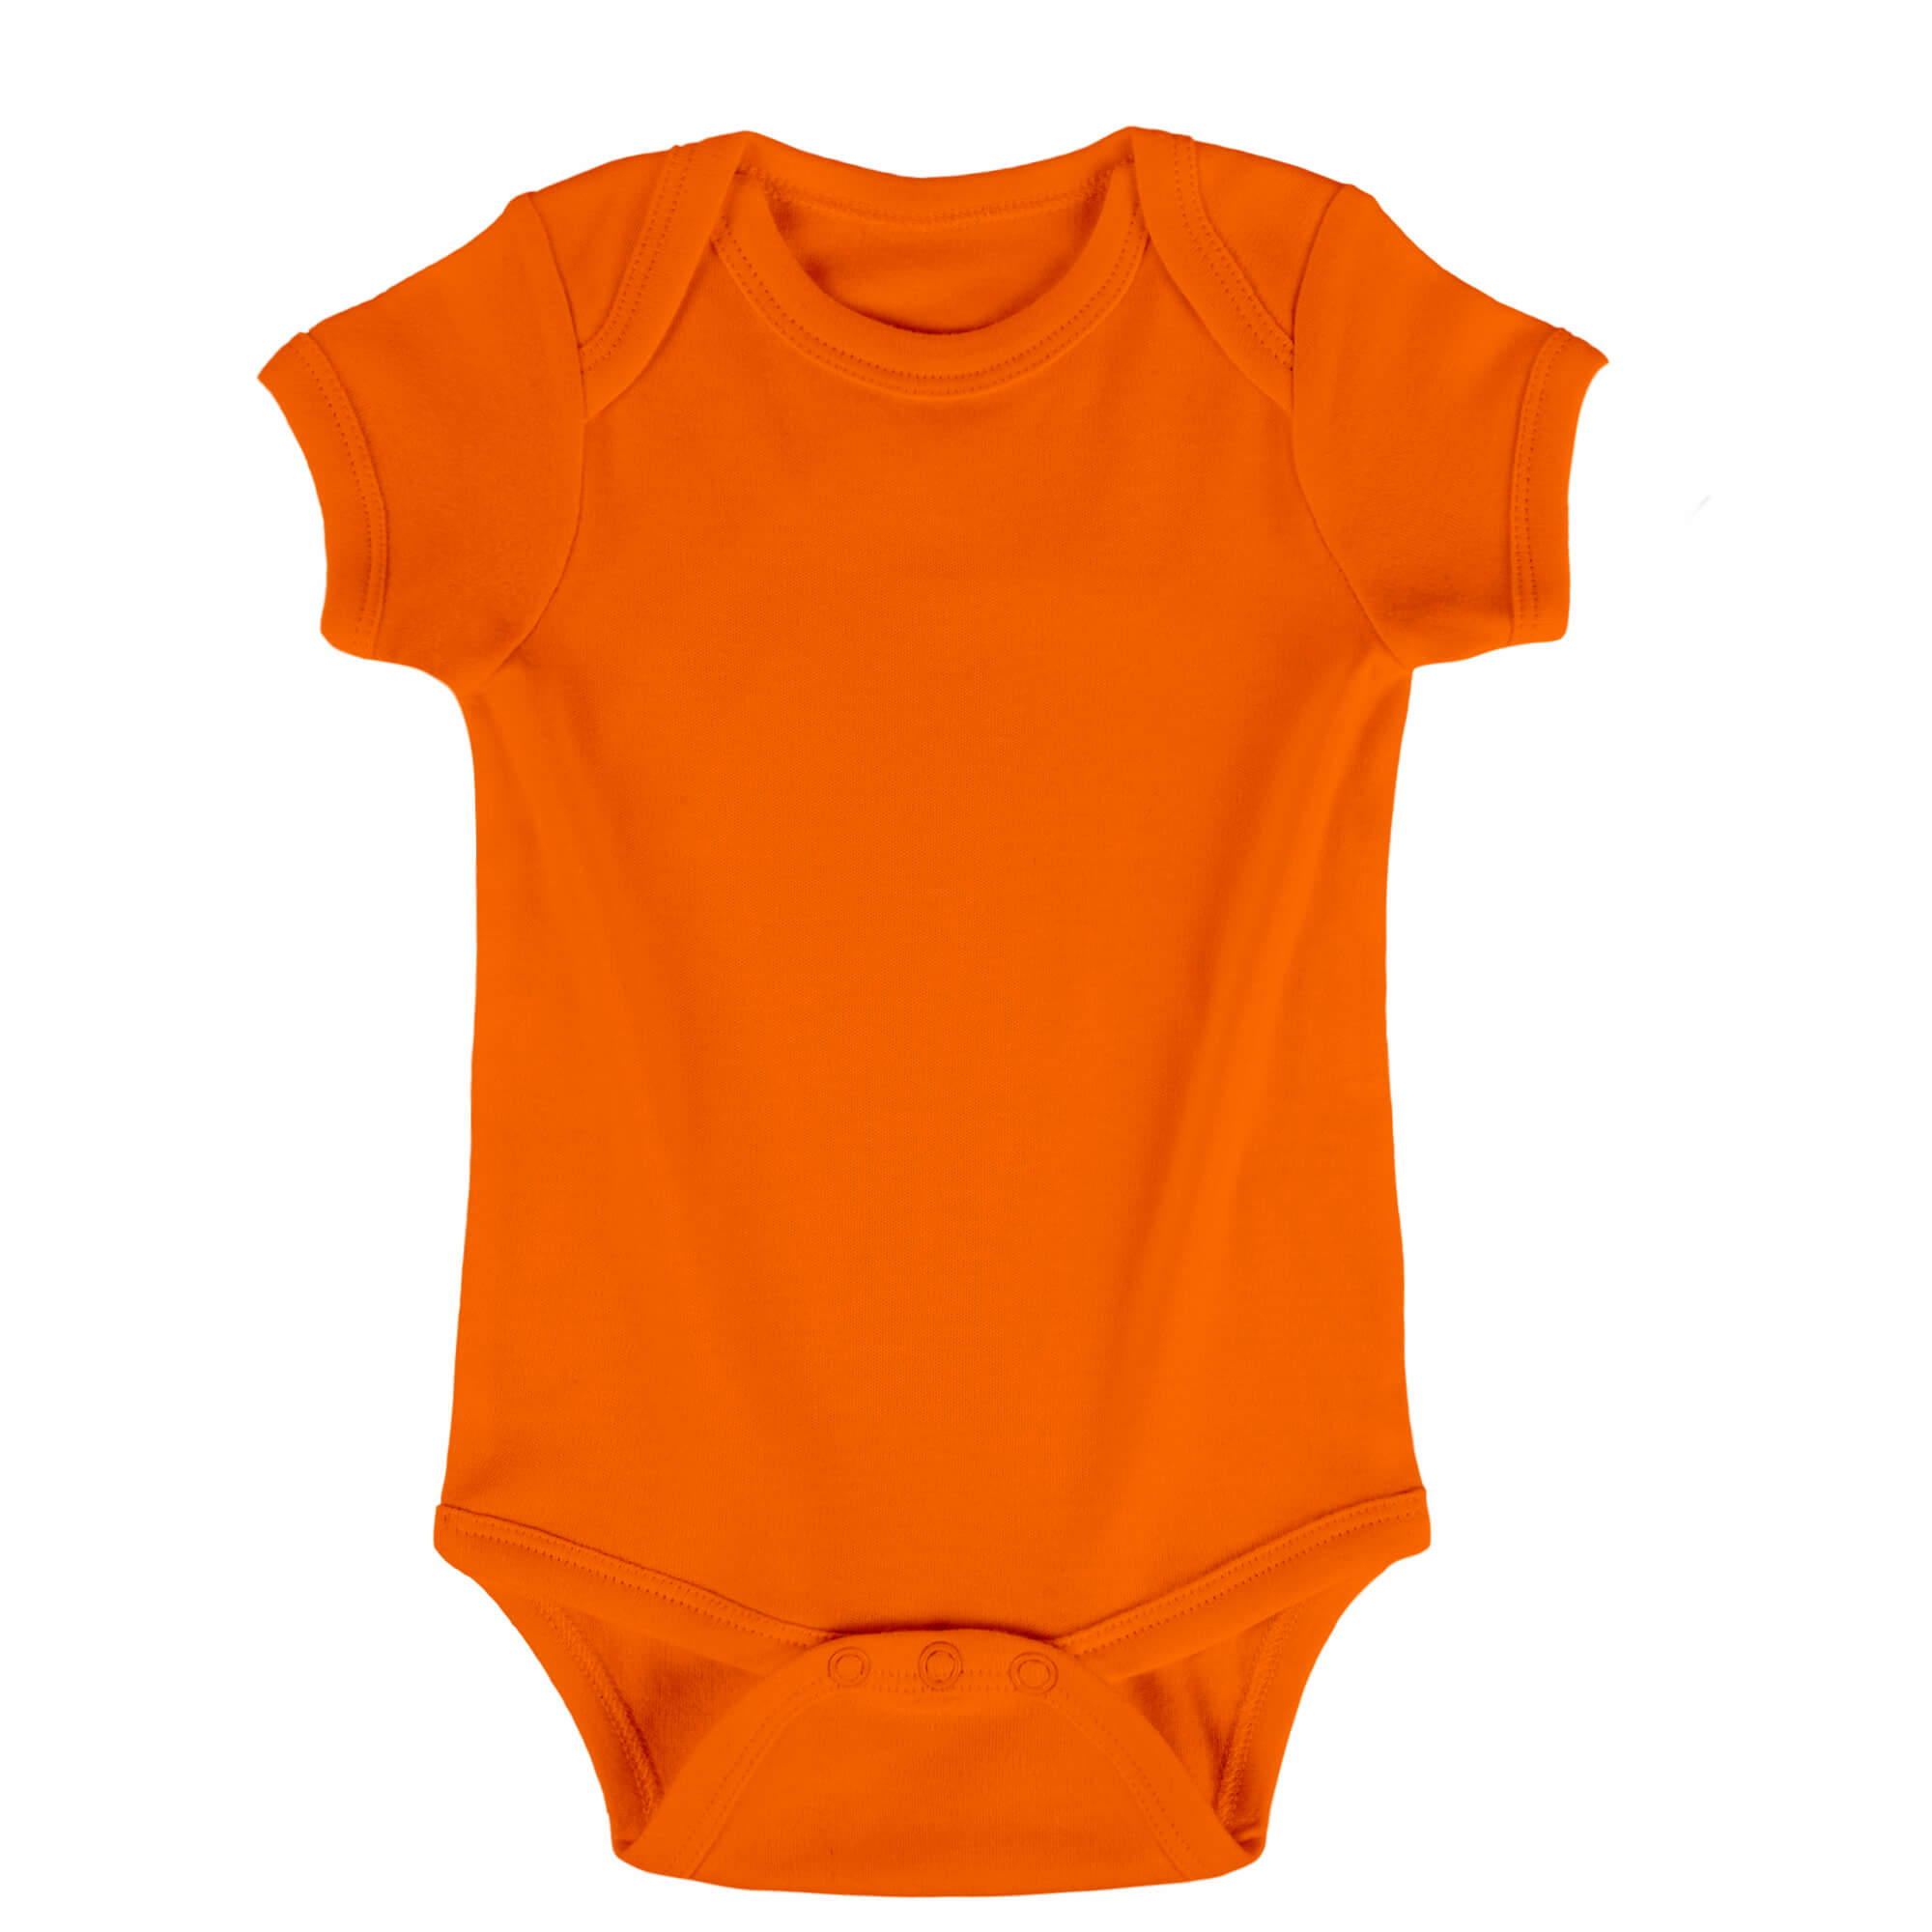 orange color number #10, onesie color selection, and color display.